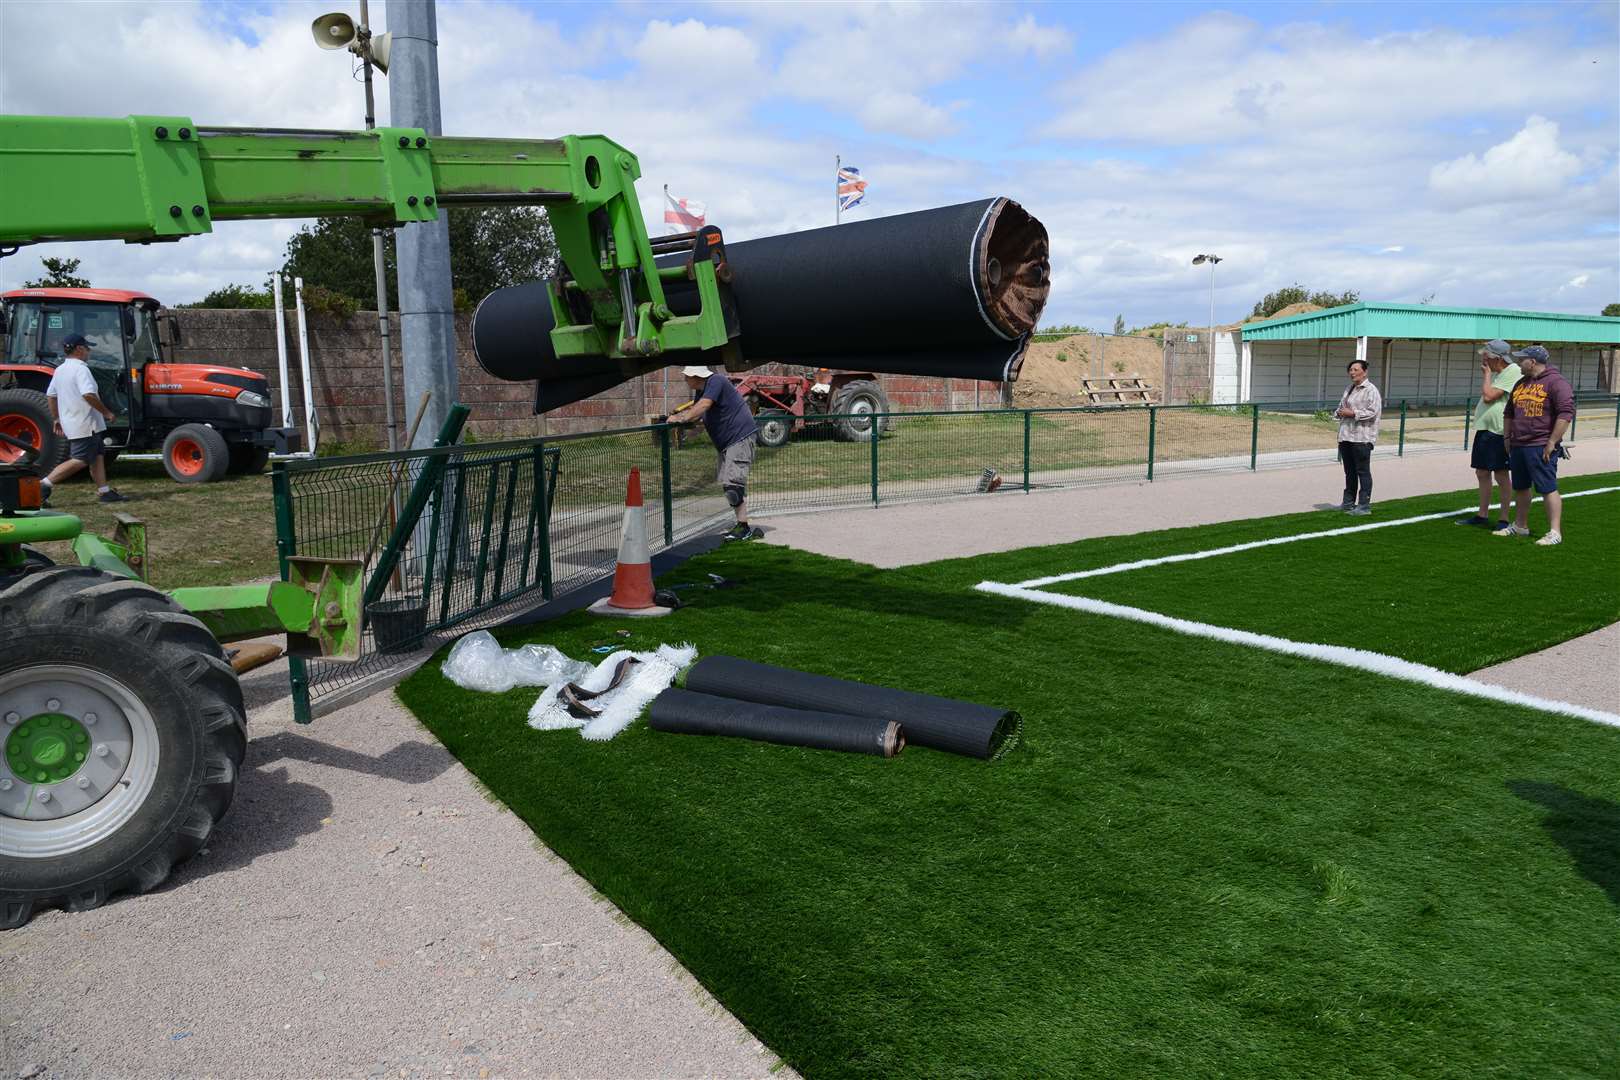 The first sections of the 3G pitch being laid in the summer of 2015. Pic: Gary Browne